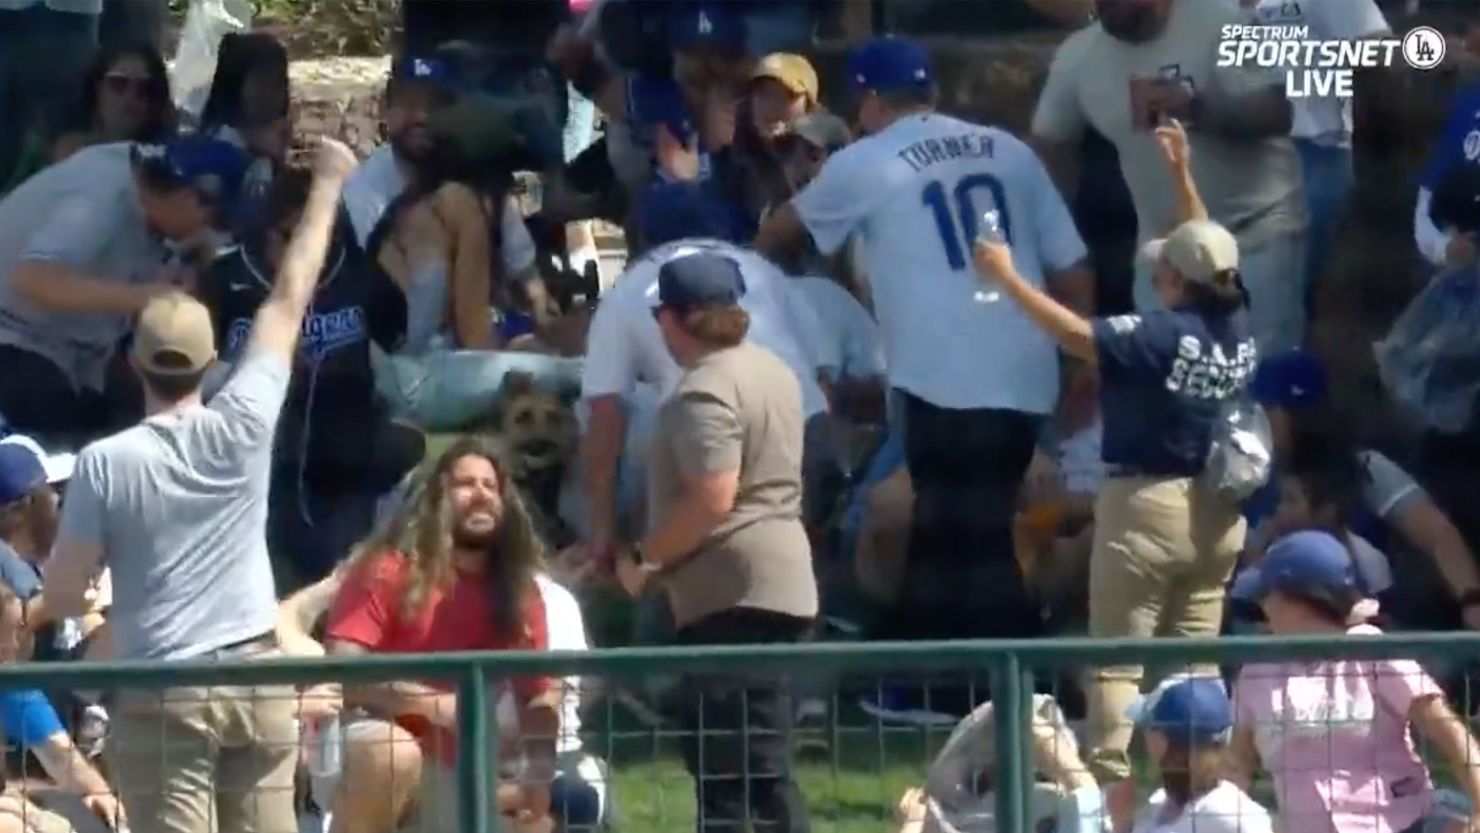 A dog catches the ball after a Dodgers prospect hits a home run. 